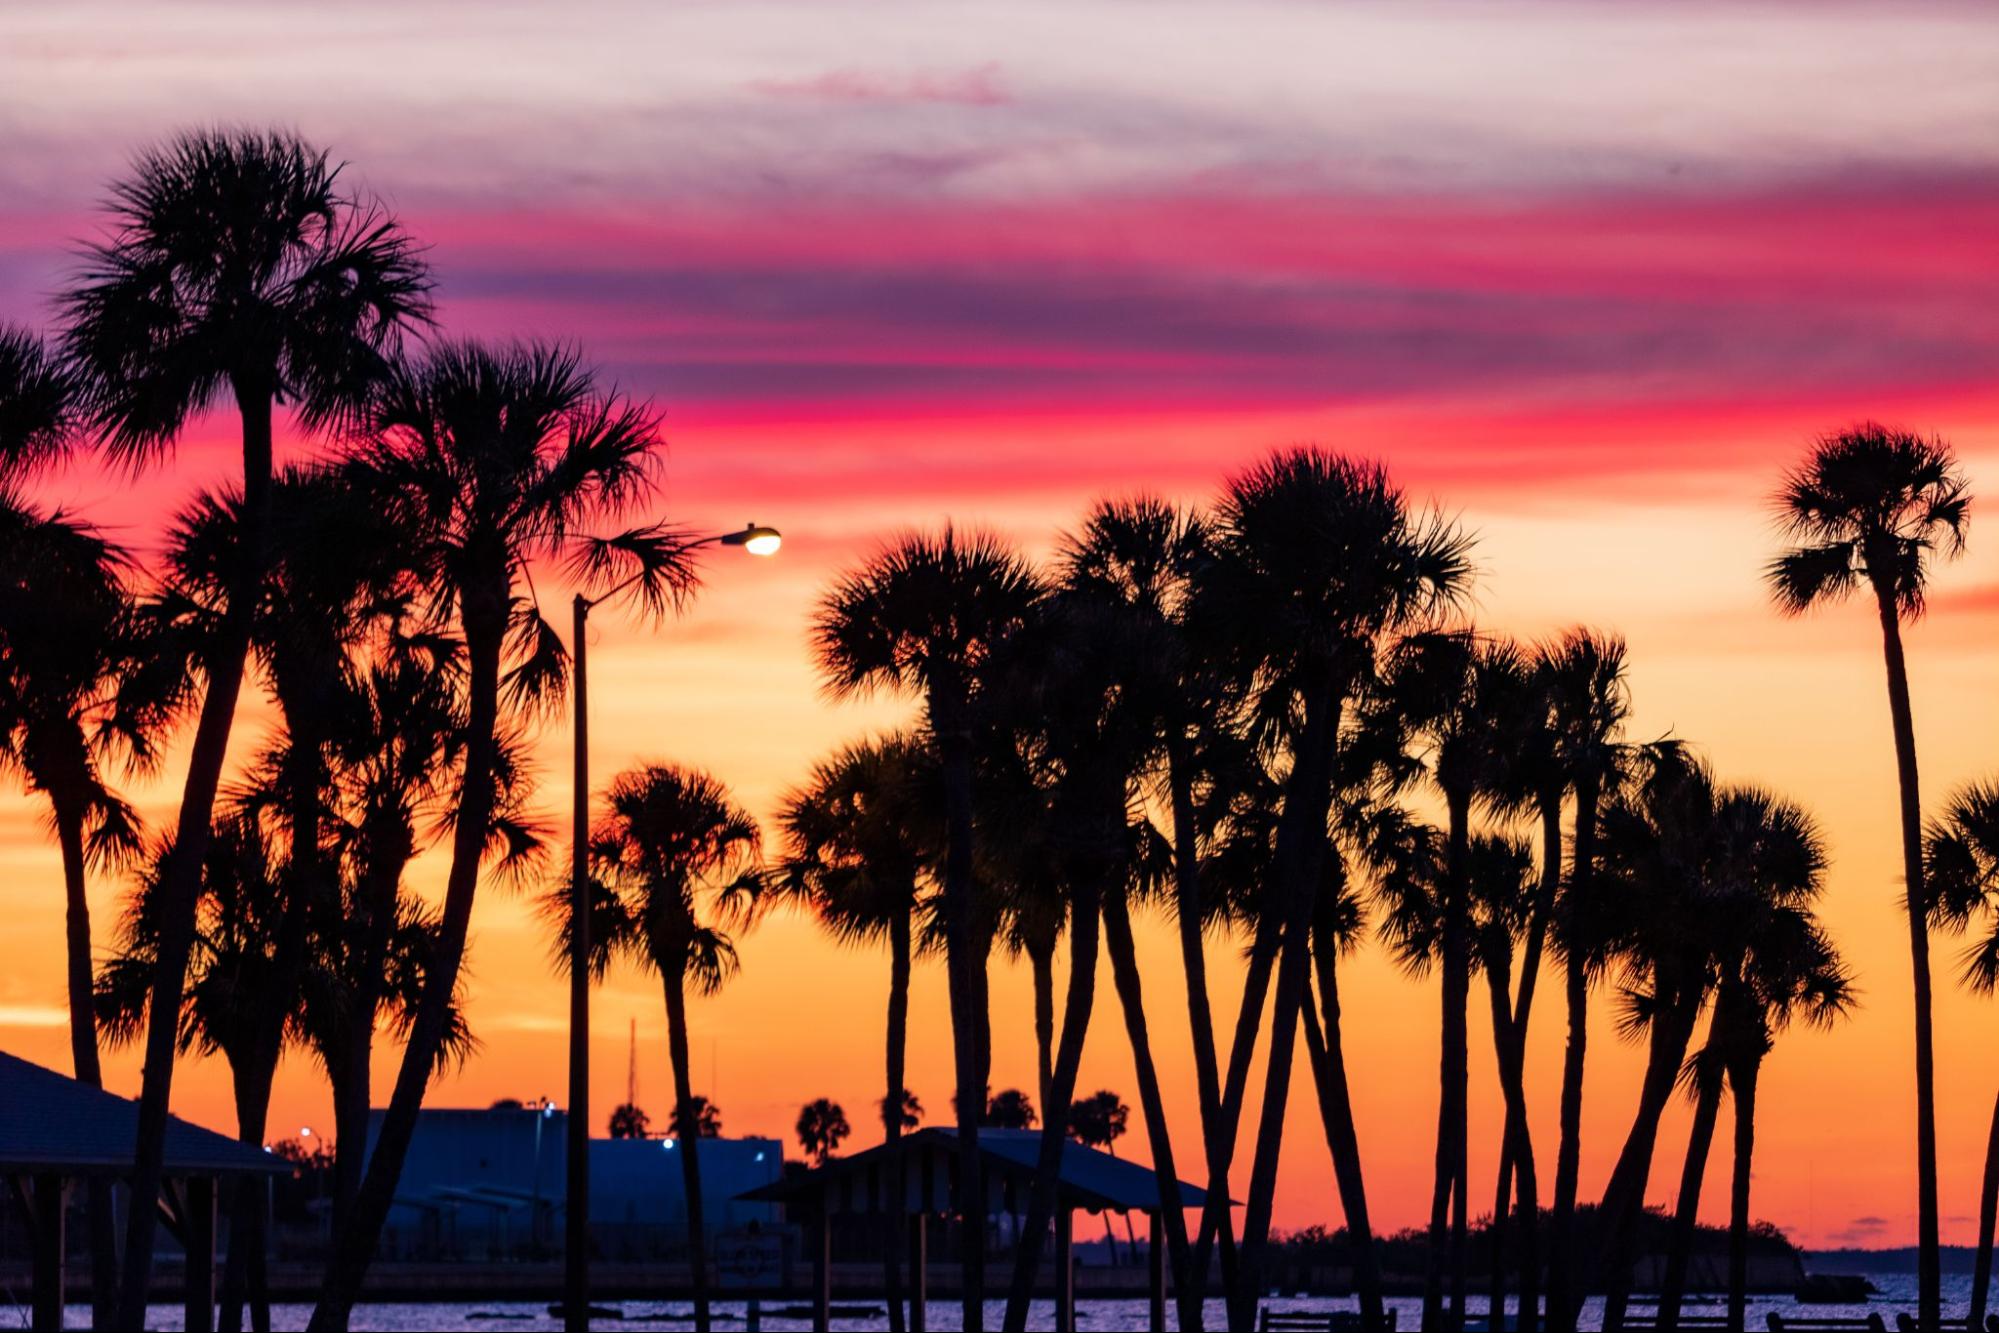  A stunning beach sunset with palm trees silhouetted against an orange sky, accented with vibrant purple and red hues.